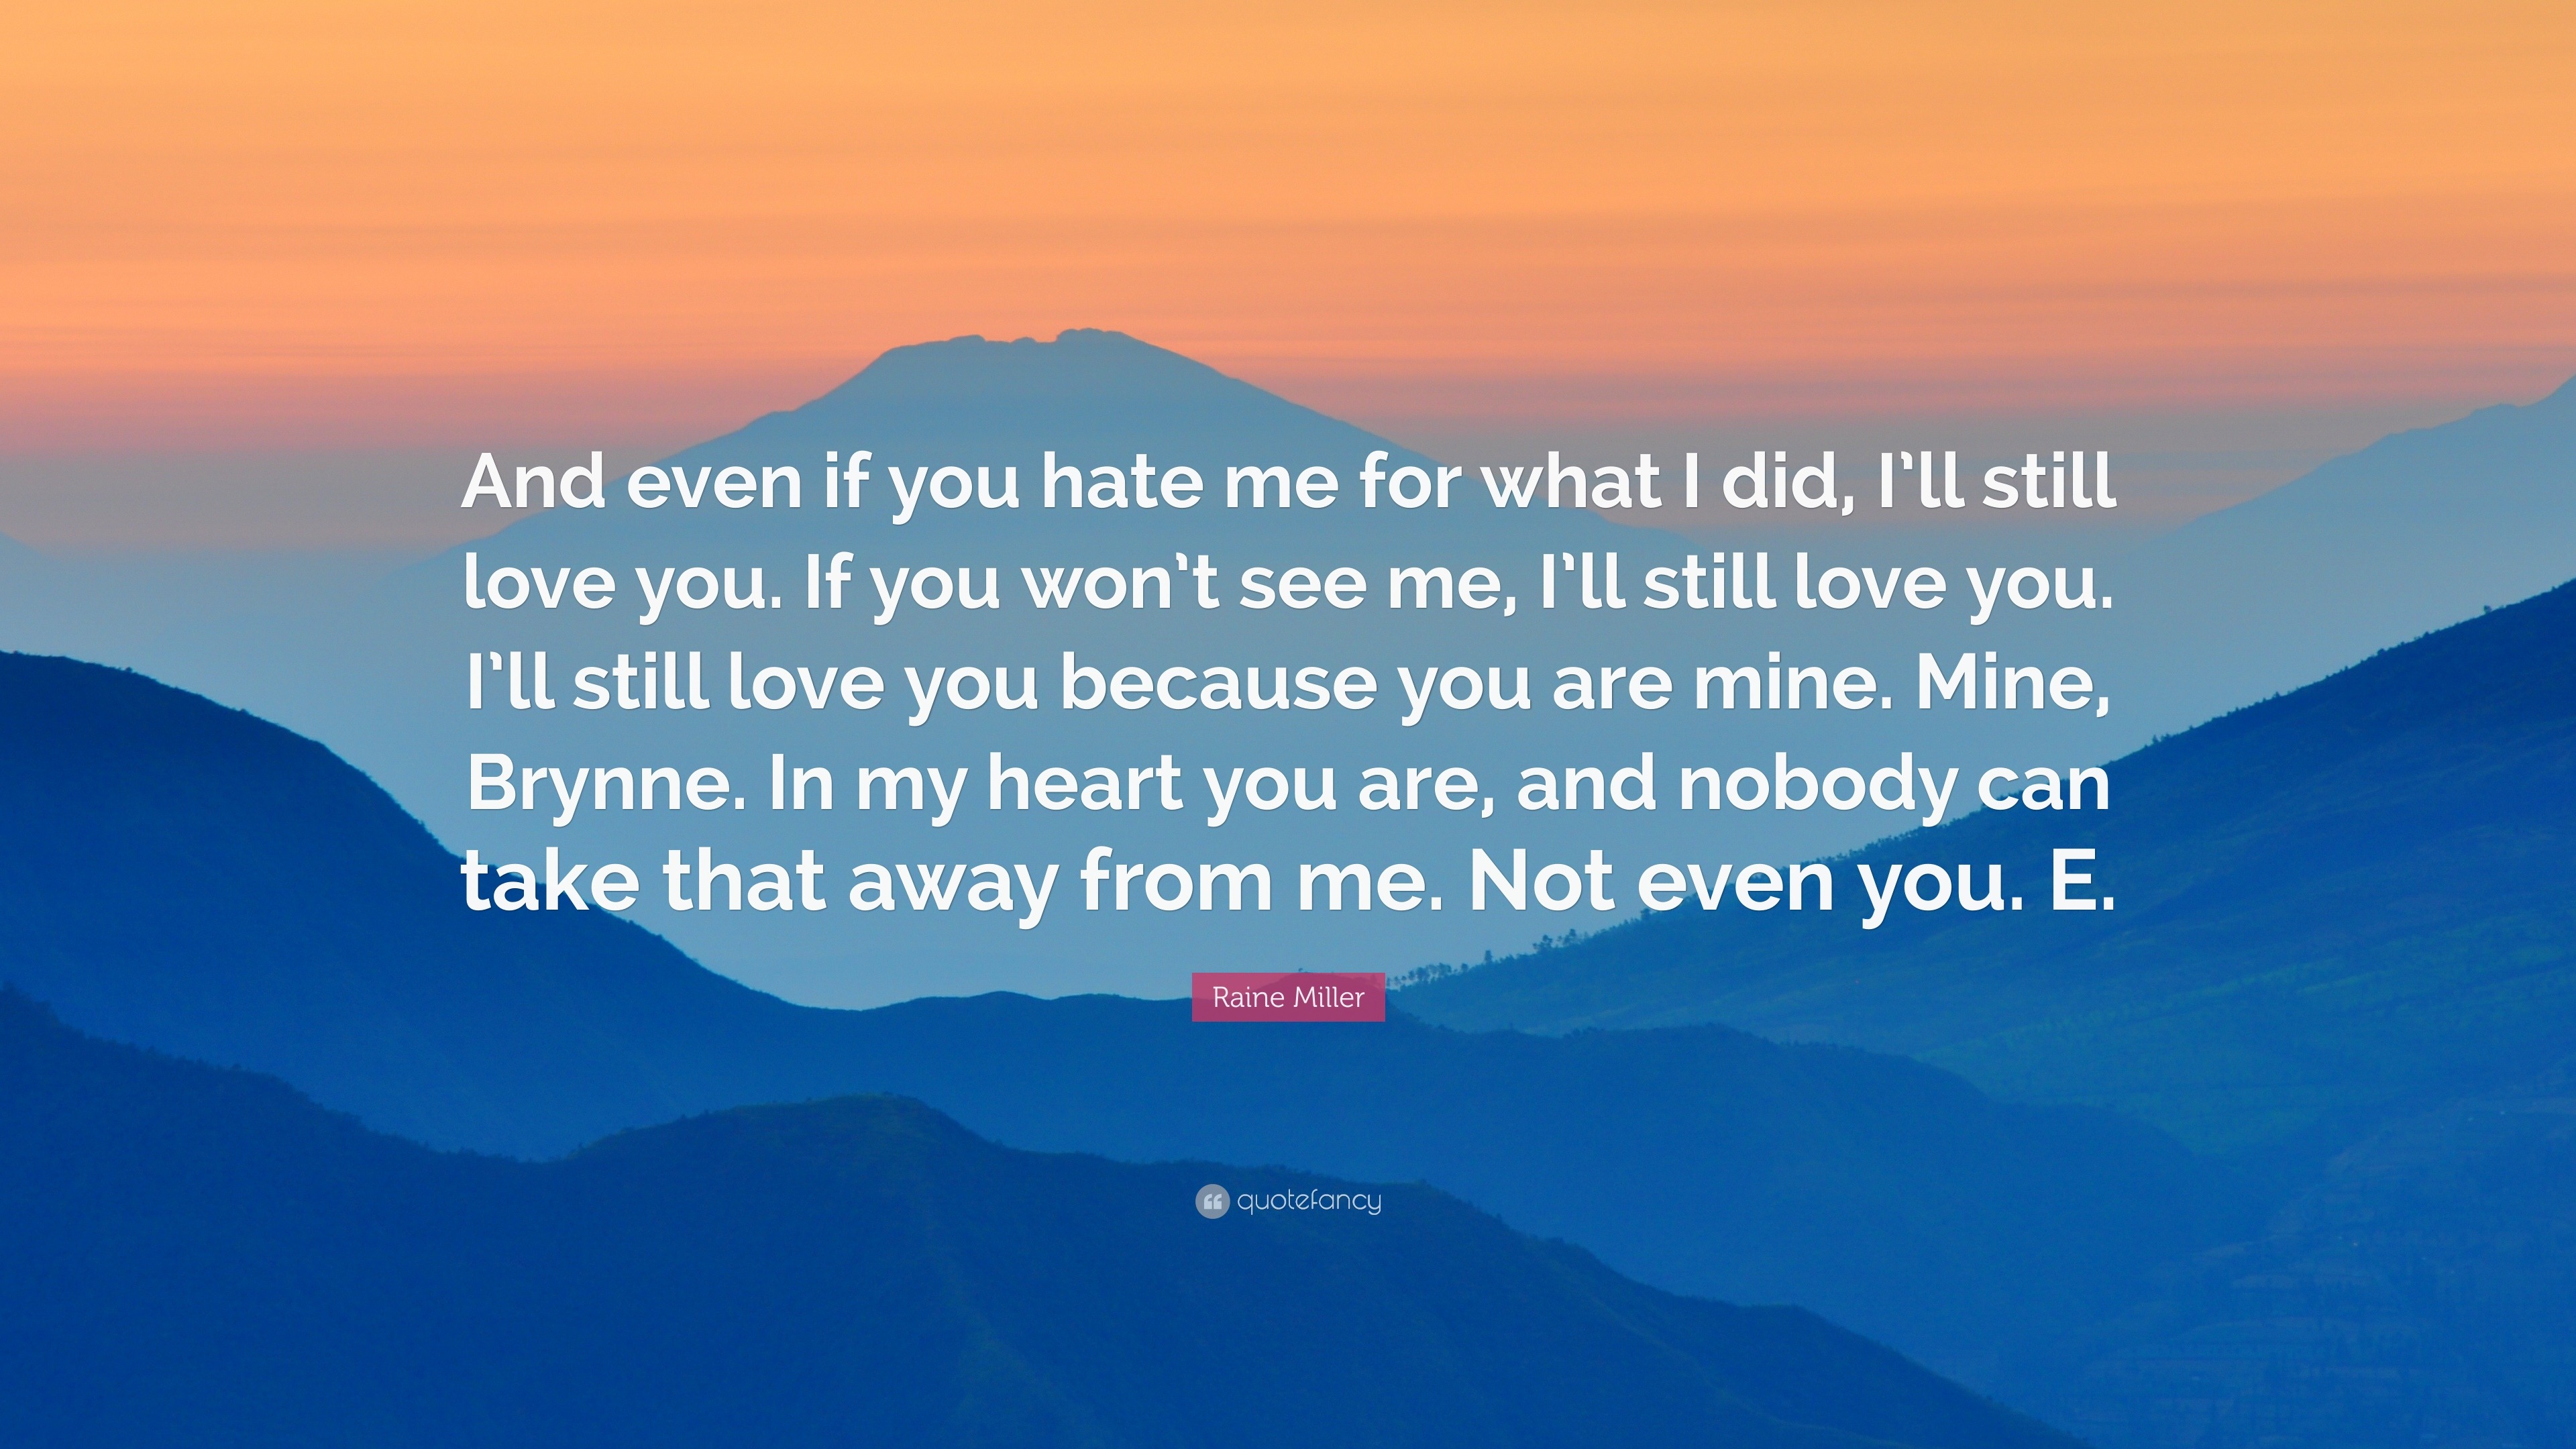 Raine Miller Quote “And even if you hate me for what I did